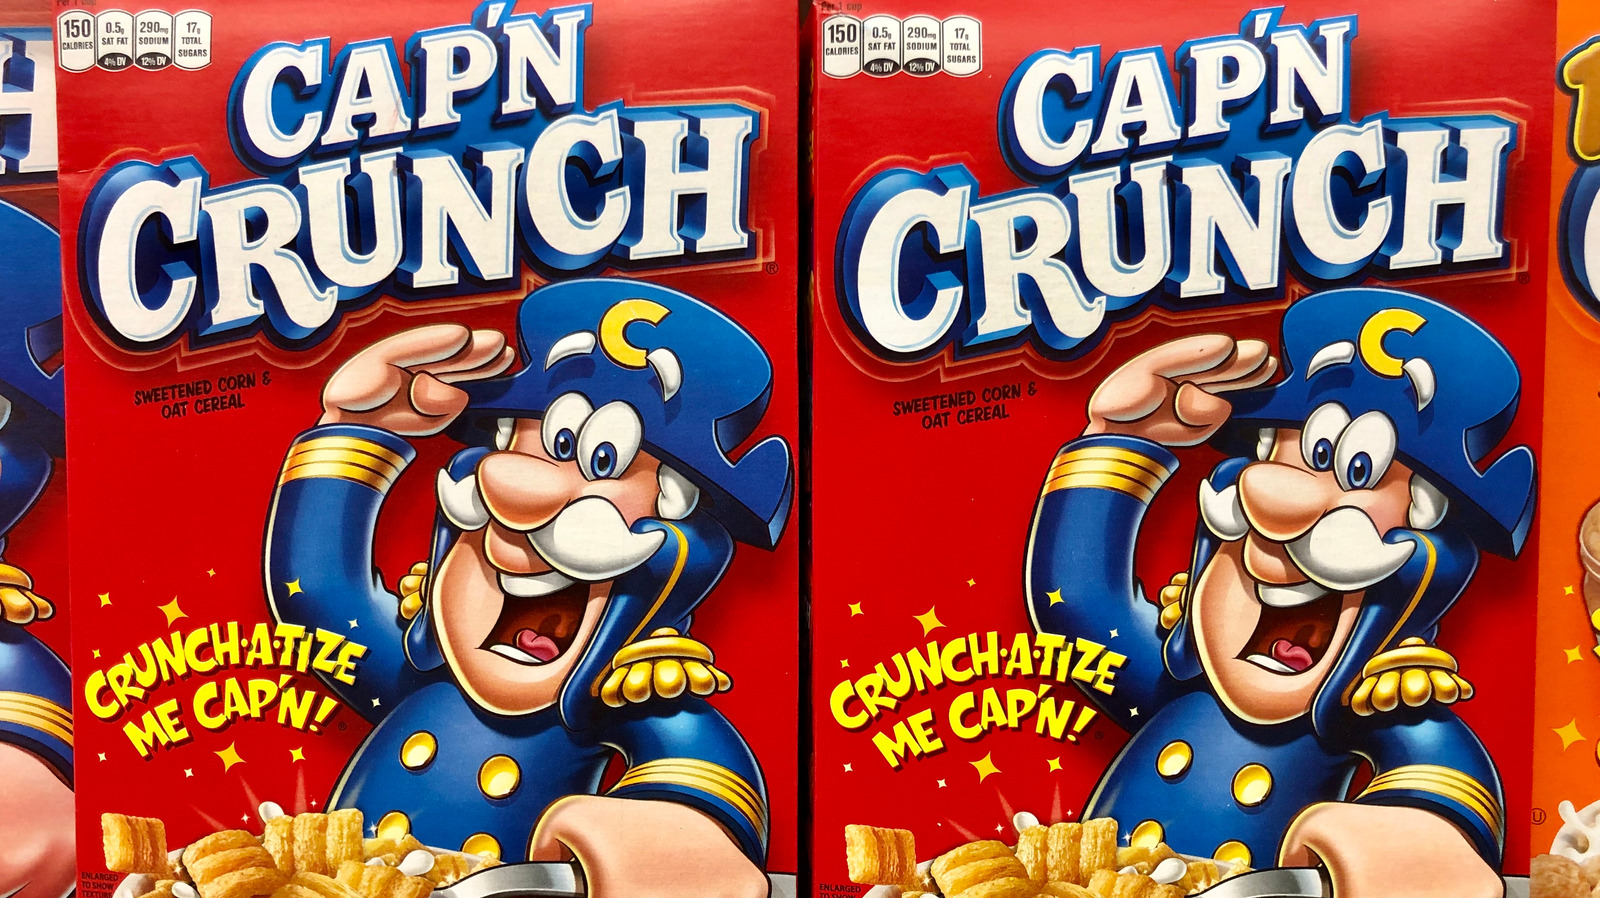 https://www.thedailymeal.com/img/gallery/what-exactly-is-the-flavor-of-capn-crunch-cereal/l-intro-1688759618.jpg